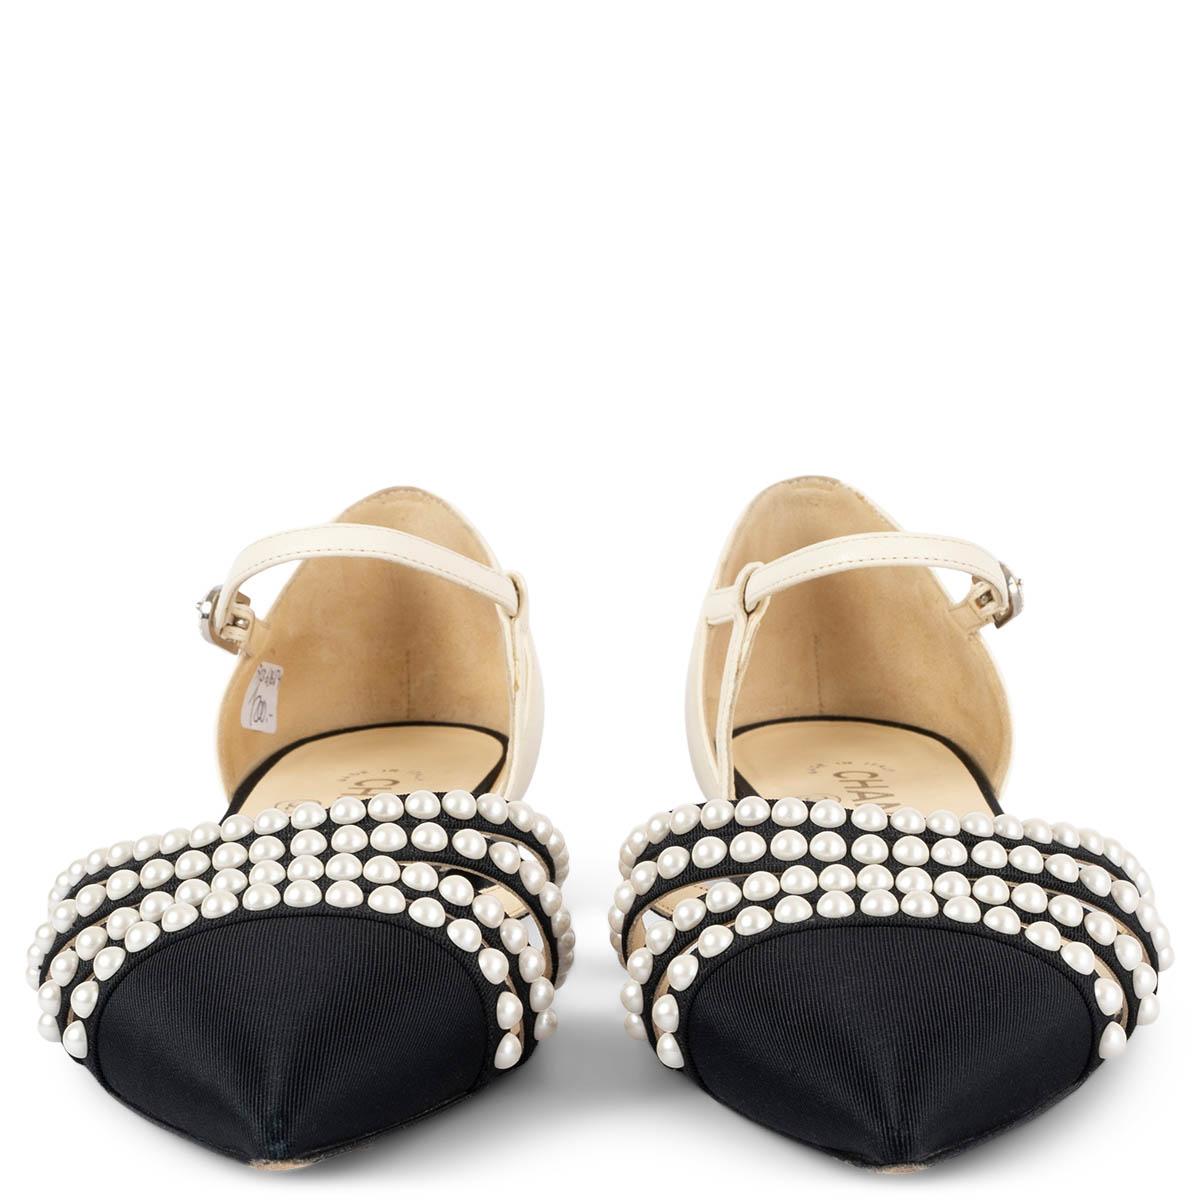 100% authentic Chanel pearl embellished pointed-toe ankle-strap flats in black grosgrain and ivory leather. Have been worn and are in excellent condition. 

2016 Paris-Rome Metiers d'Art

Measurements
Model	Chanel16A G31892
Imprinted Size	38.5
Shoe